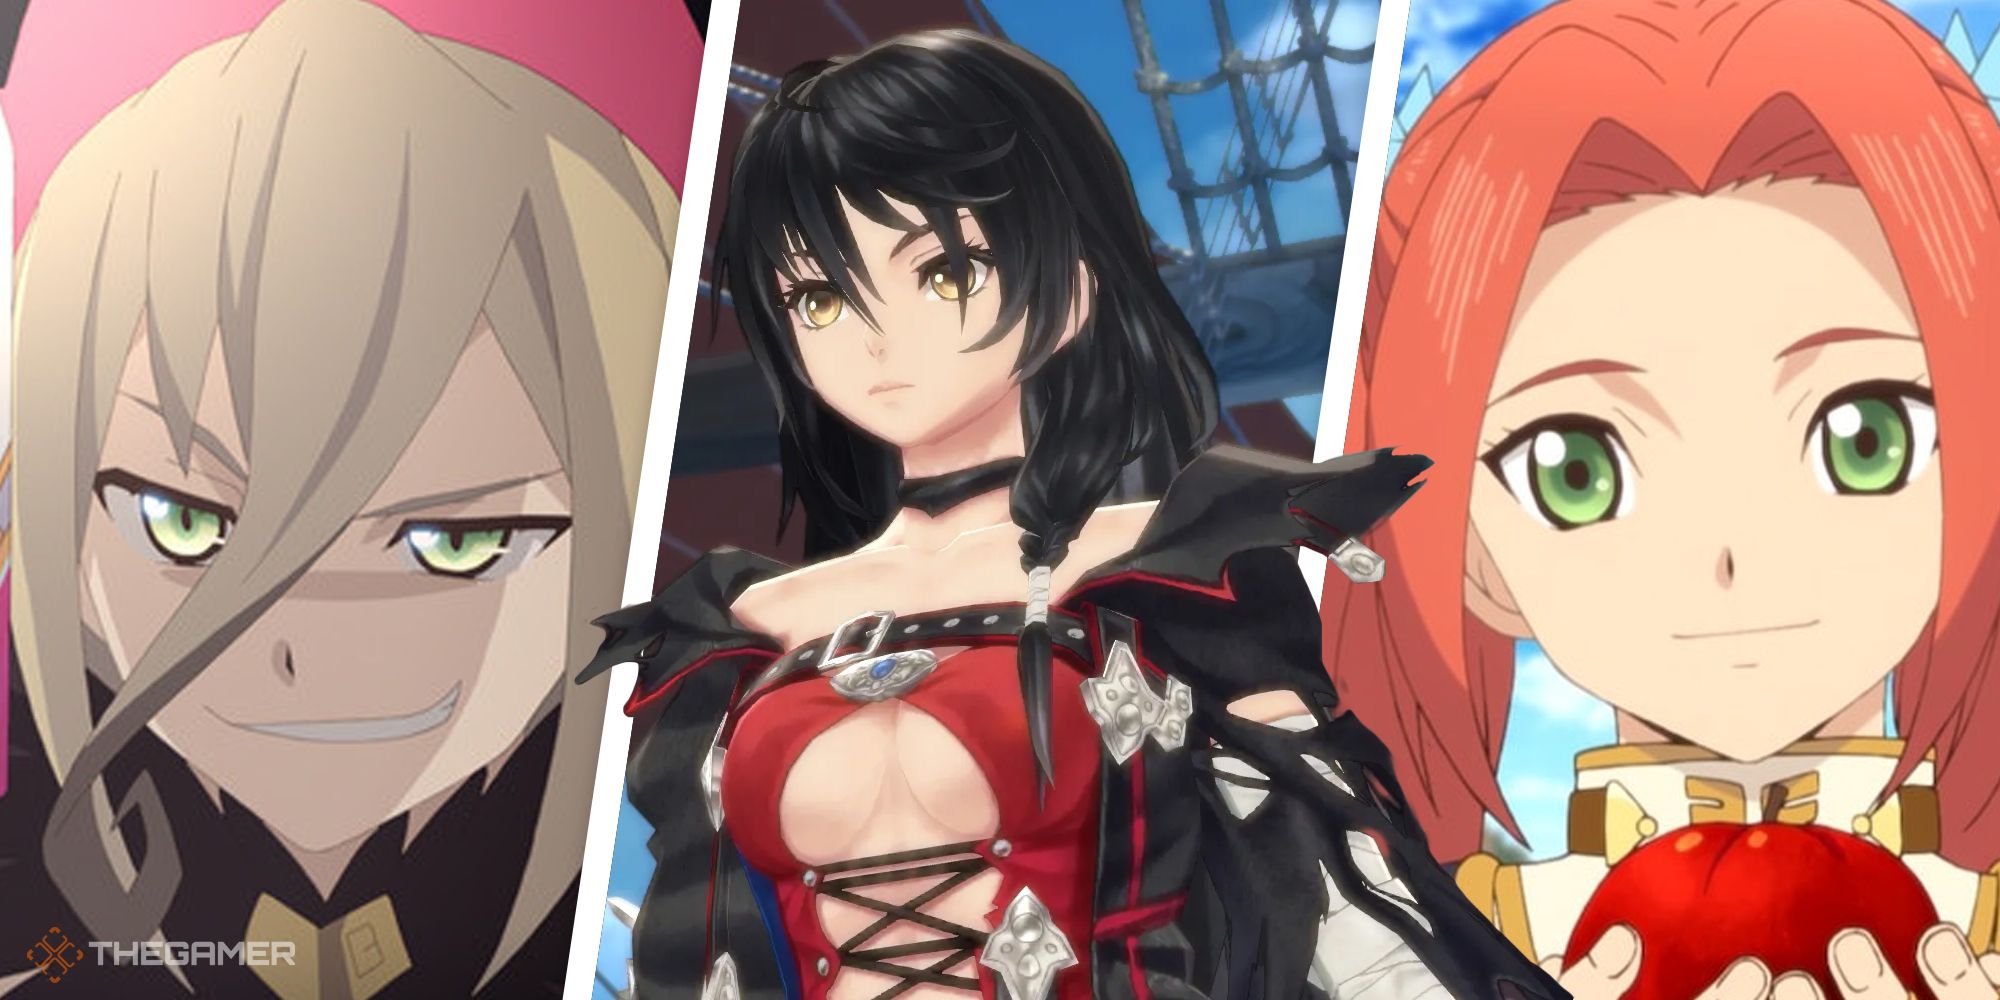 tales of berseria eleanor was a great character